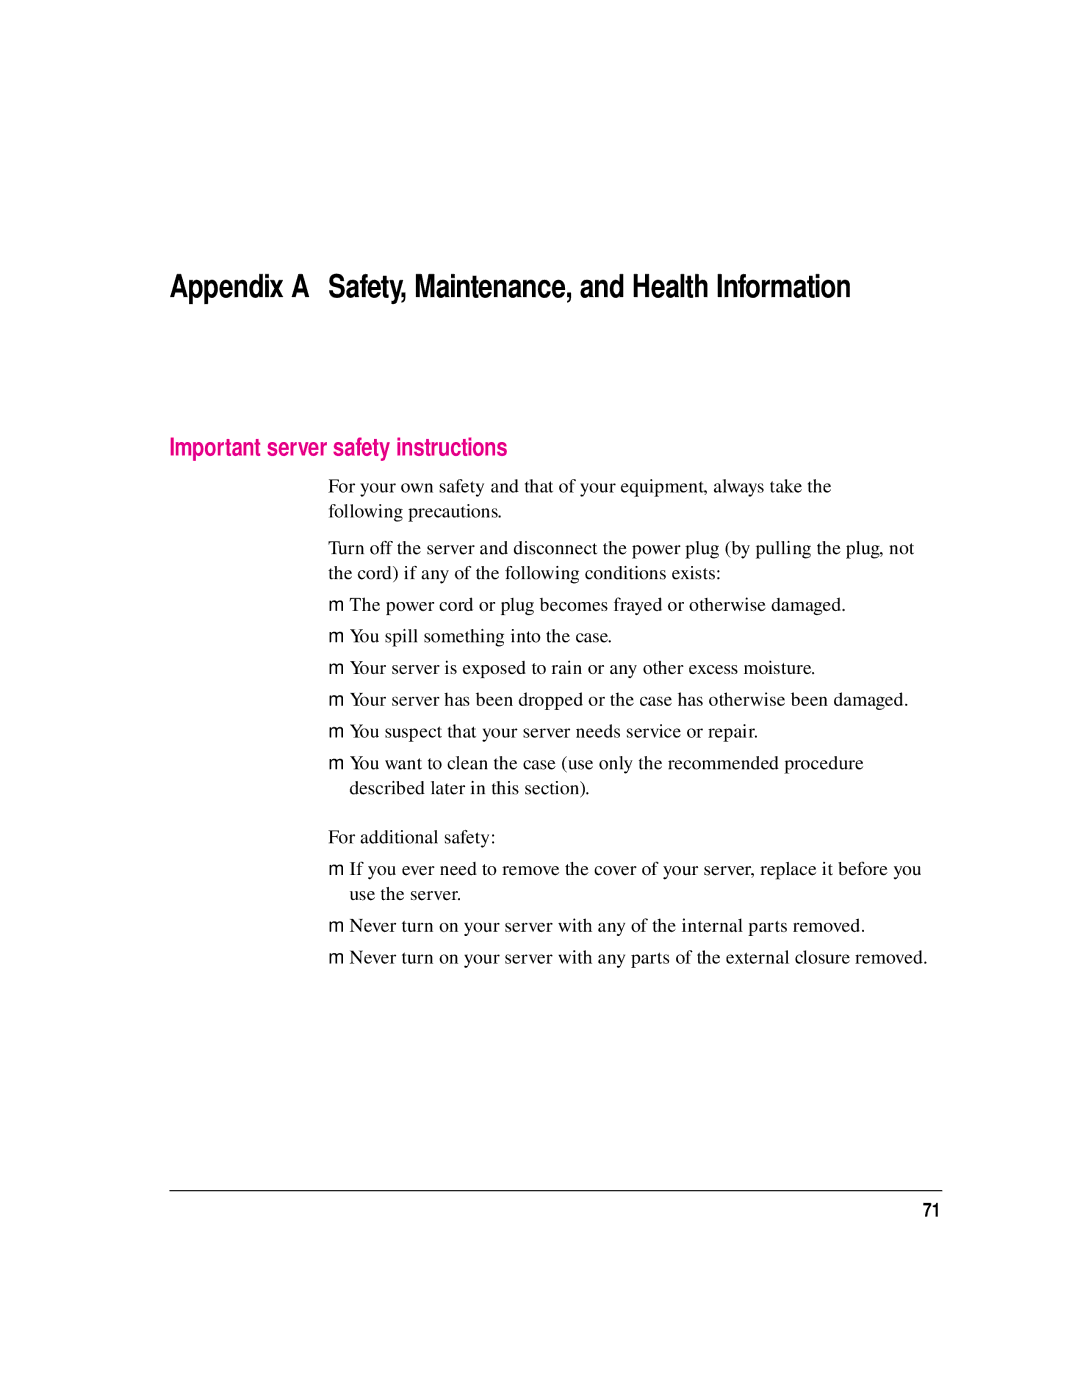 Apple 8550 Appendix a Safety, Maintenance, and Health Information, Important server safety instructions 